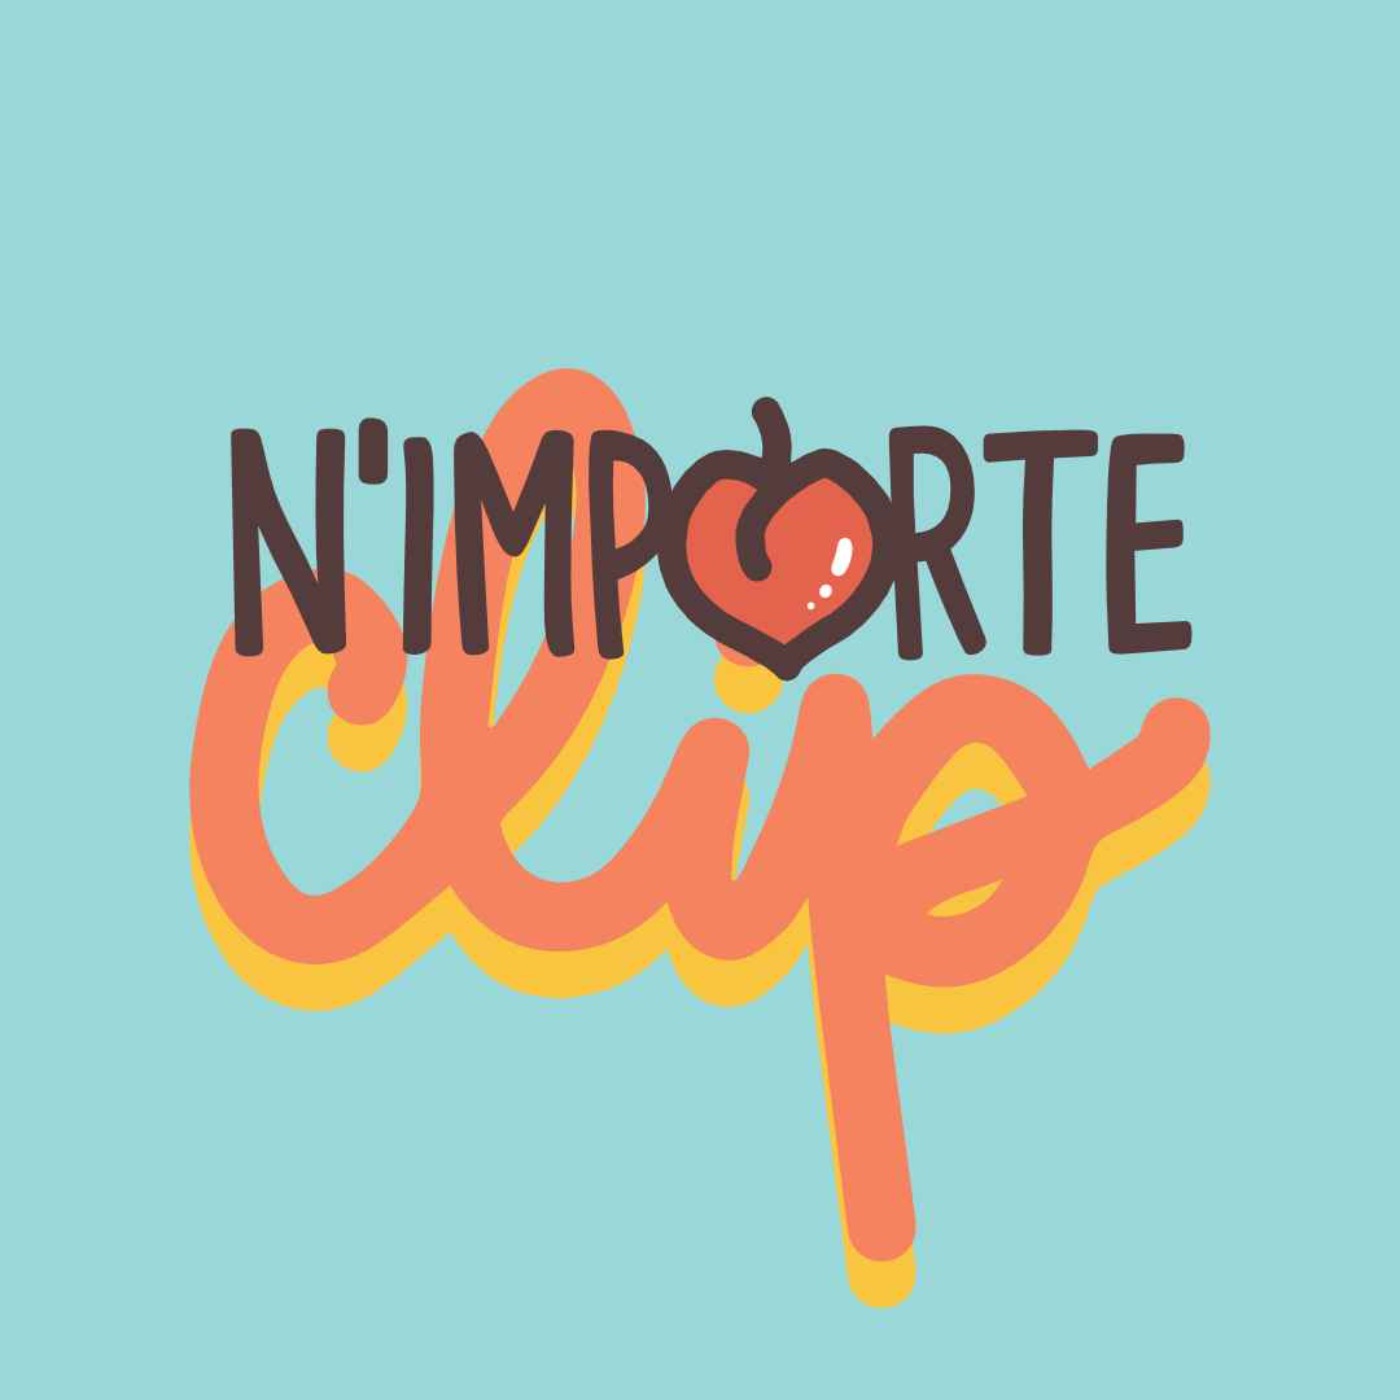 N'importe Clip #19 - Montero (Call me by your name)